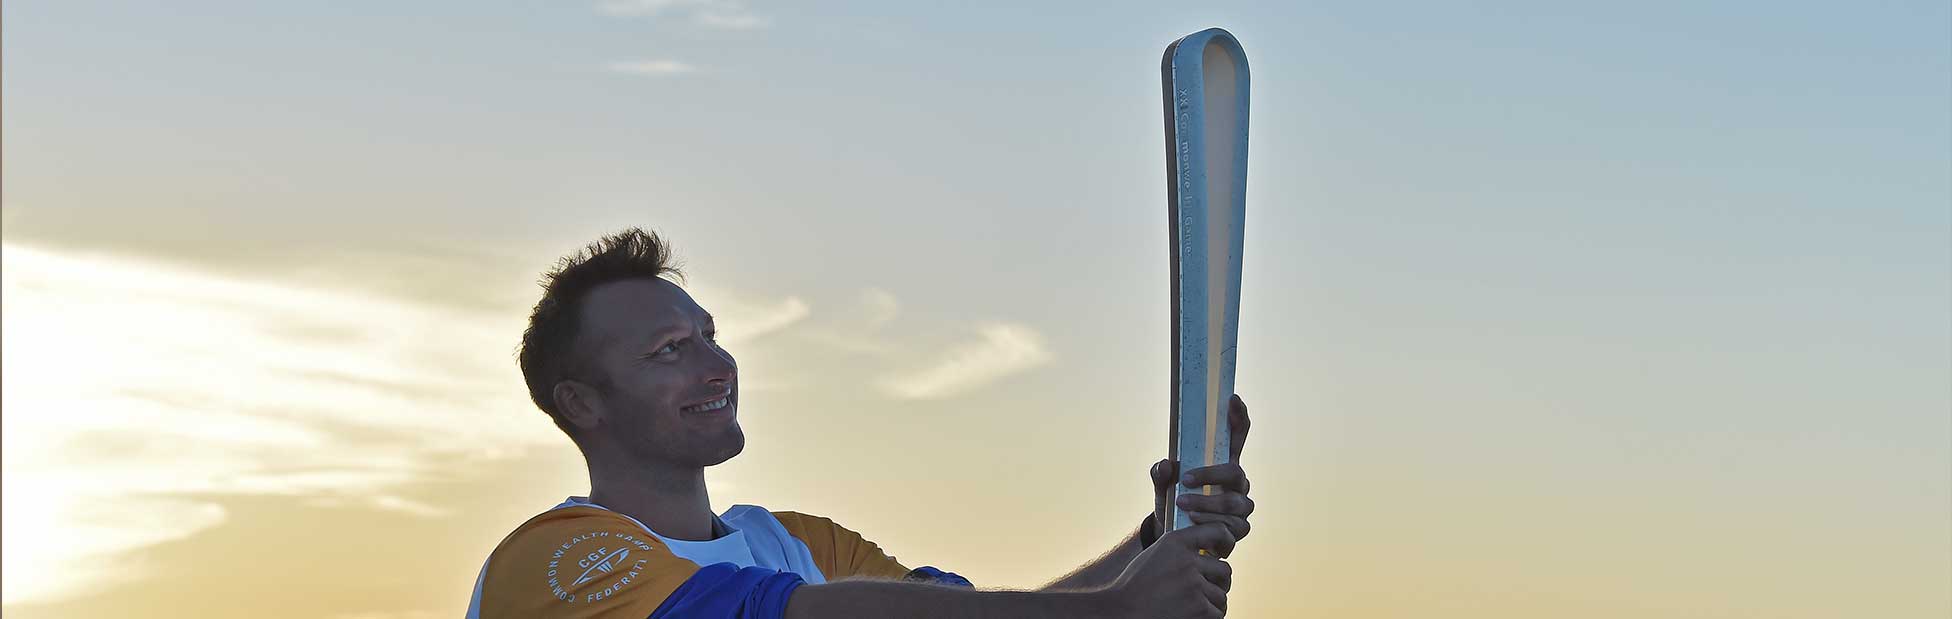 Ian Thorpe holding the Queens Baton in front of sunset sky